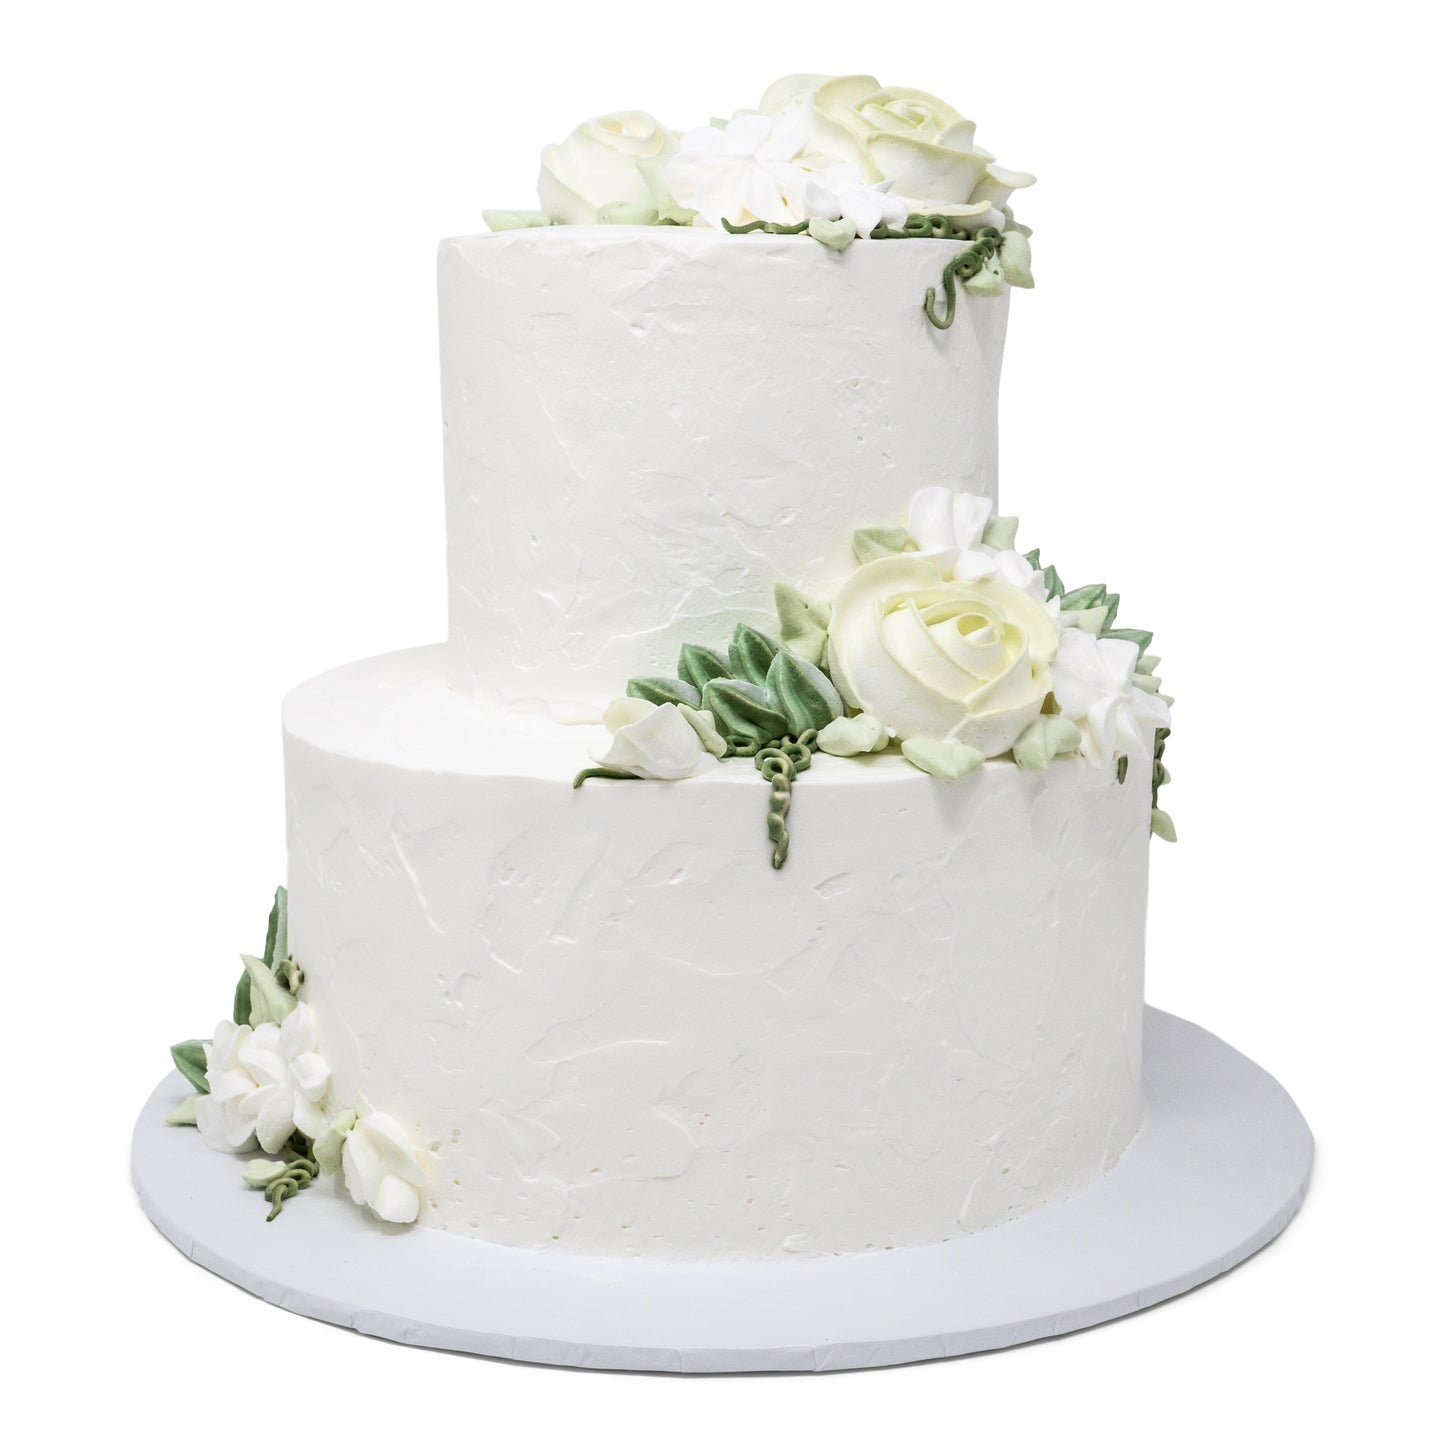 Smooth Texture with Icing Flowers - 2 Tier Cake